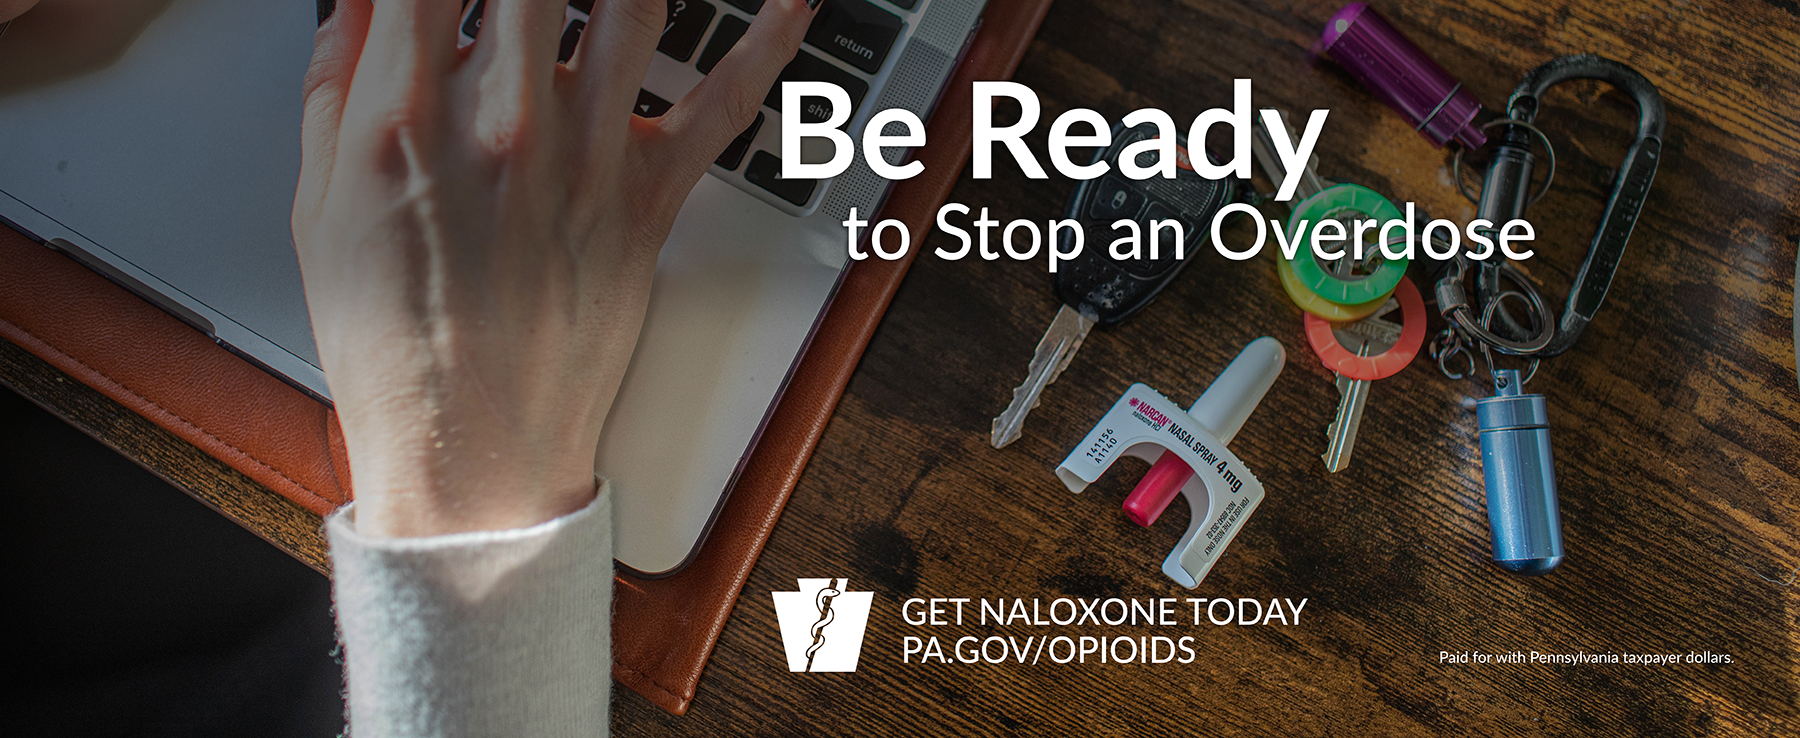 Be ready to stop an overdose